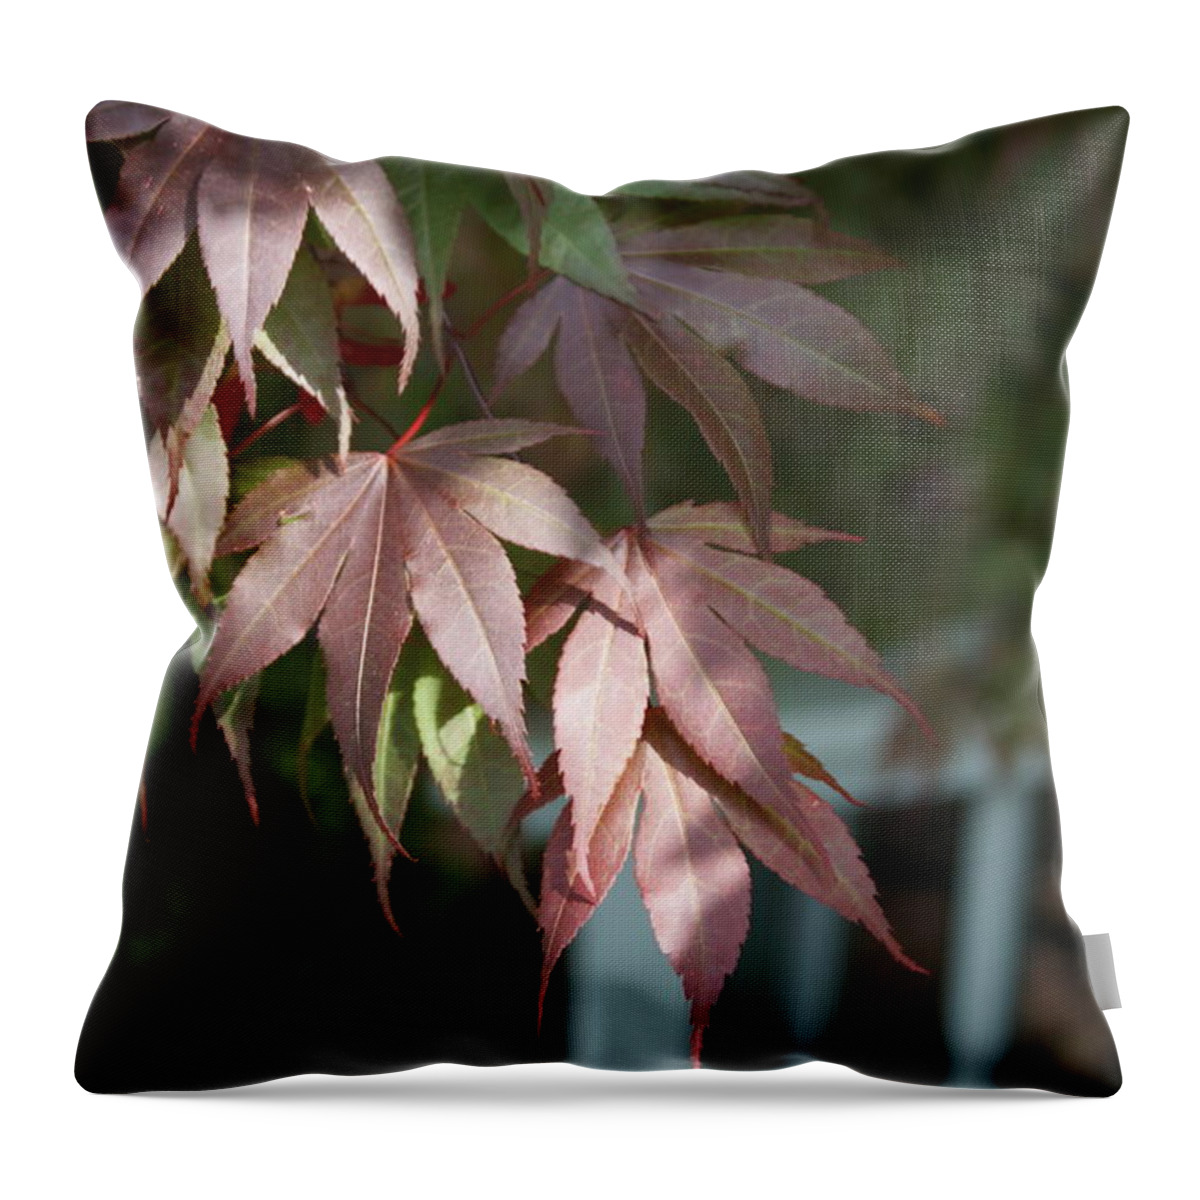  Throw Pillow featuring the photograph Japanese Maple by Heather E Harman